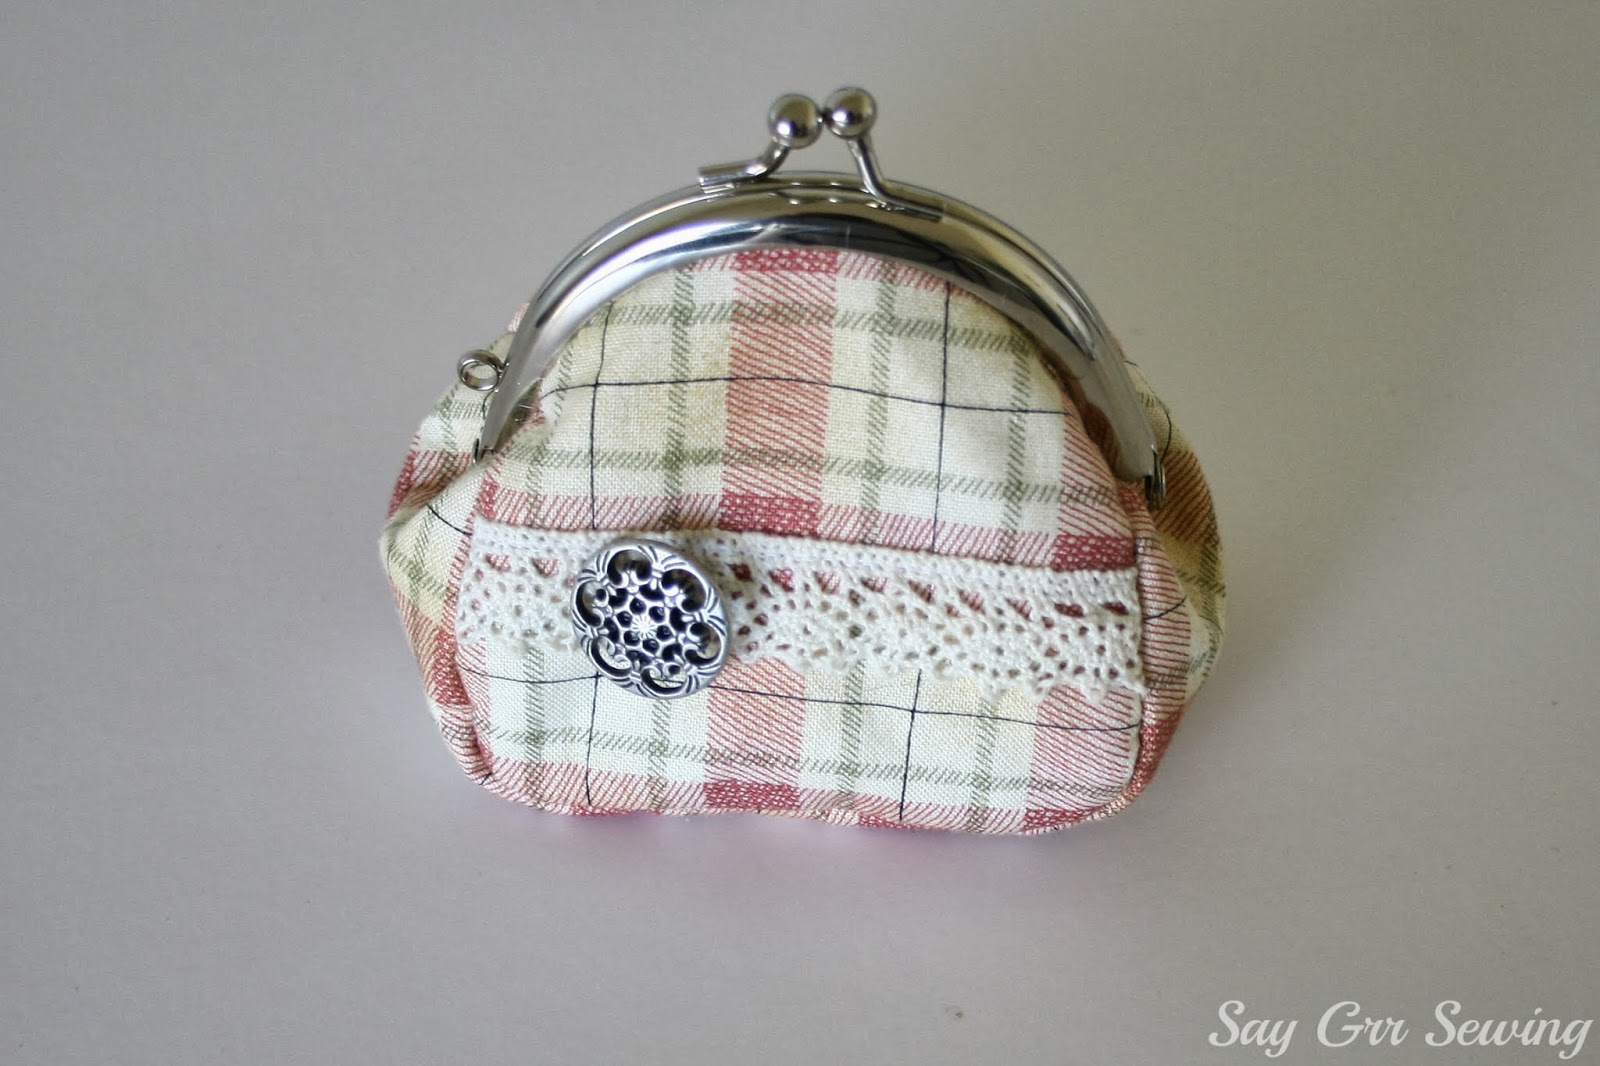 Say Grr Sewing: Gusseted Coin Purse Pattern